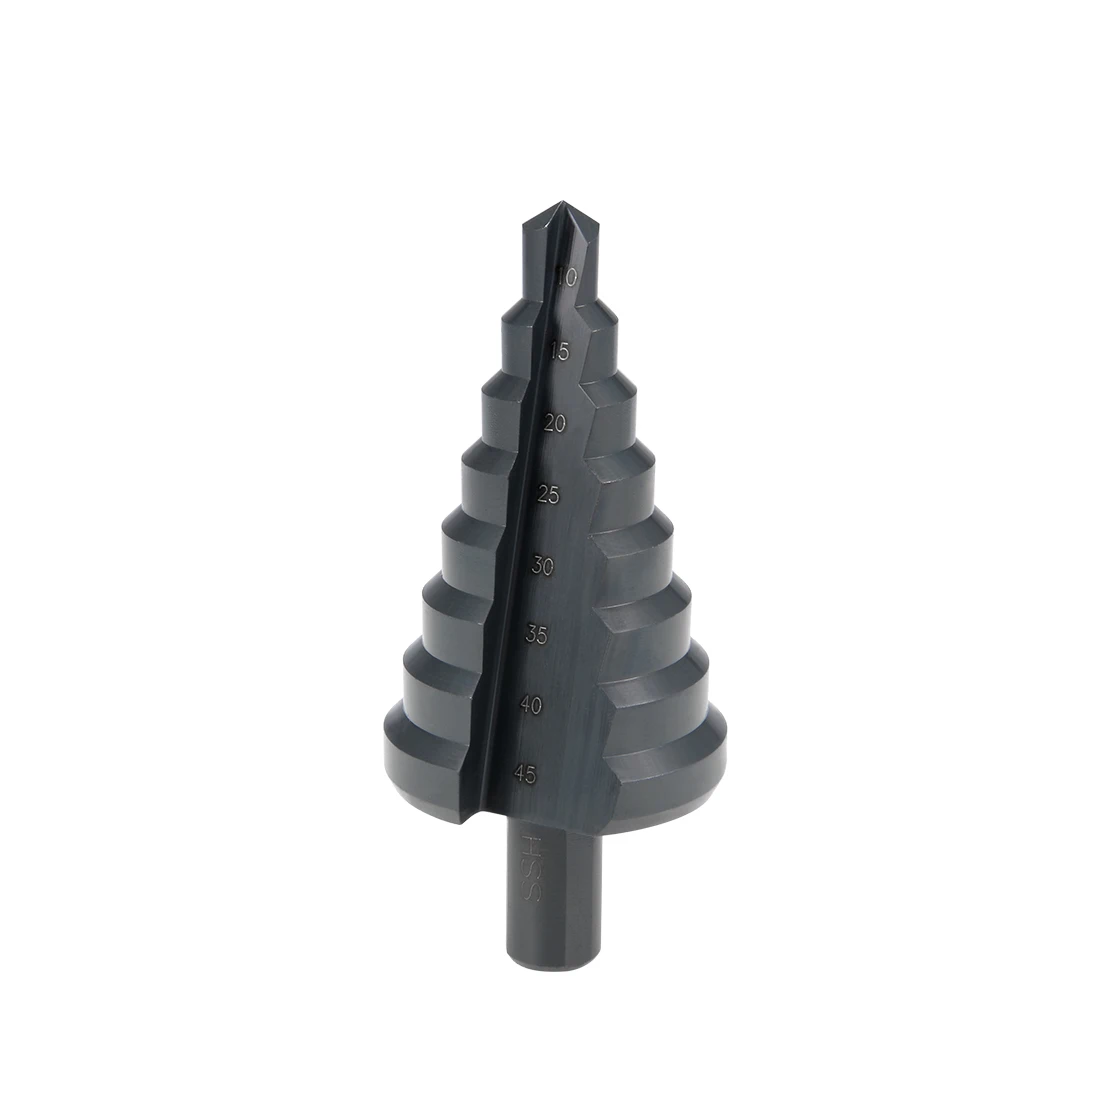 

uxcell Nitride Step Drill Bit 10mm to 45mm 8 Steps Straight Flutes Trilateral Shank for Metal Wood Plastic